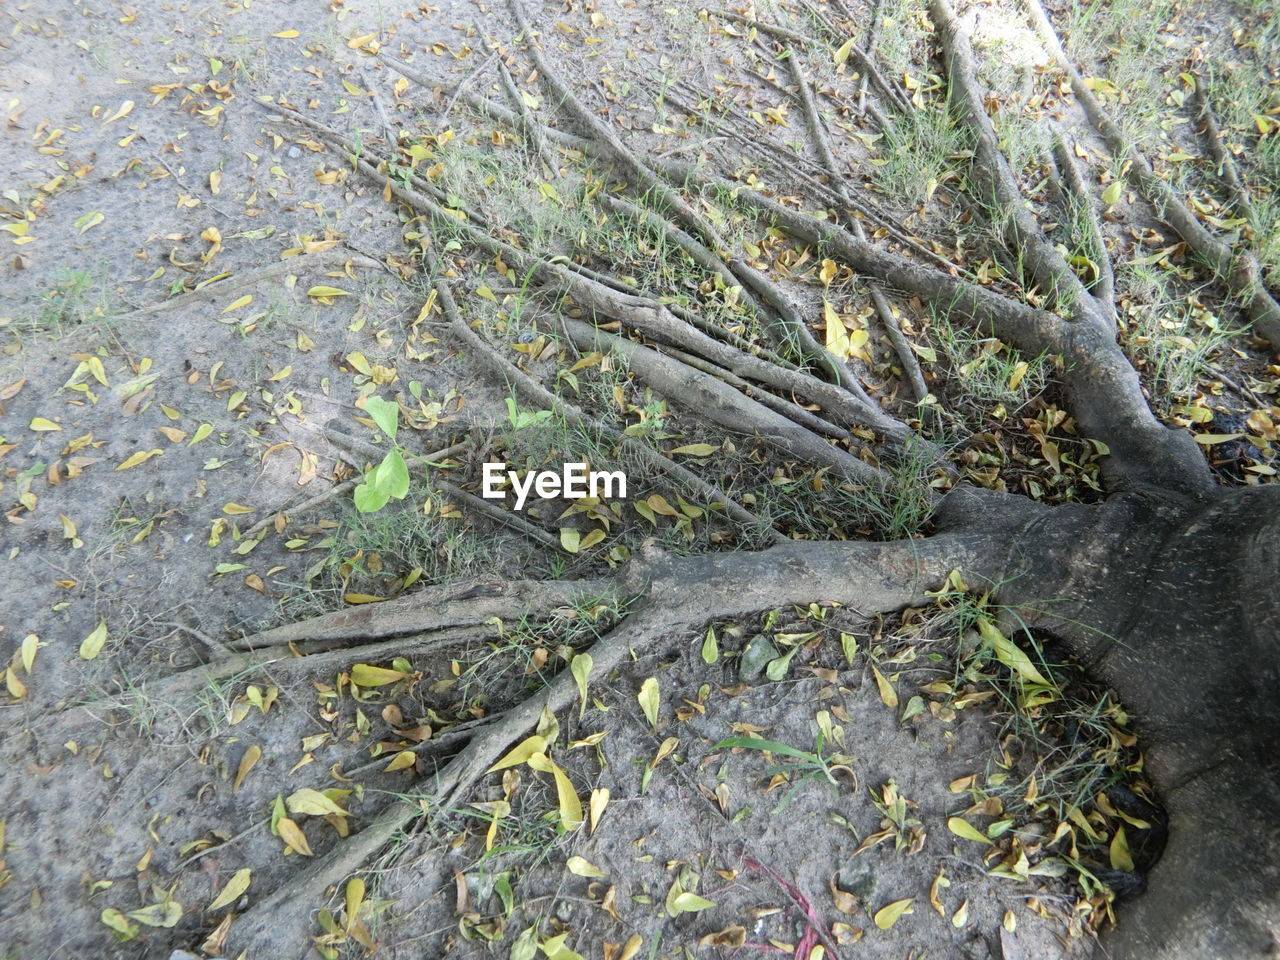 HIGH ANGLE VIEW OF TREE ROOTS ON LAND